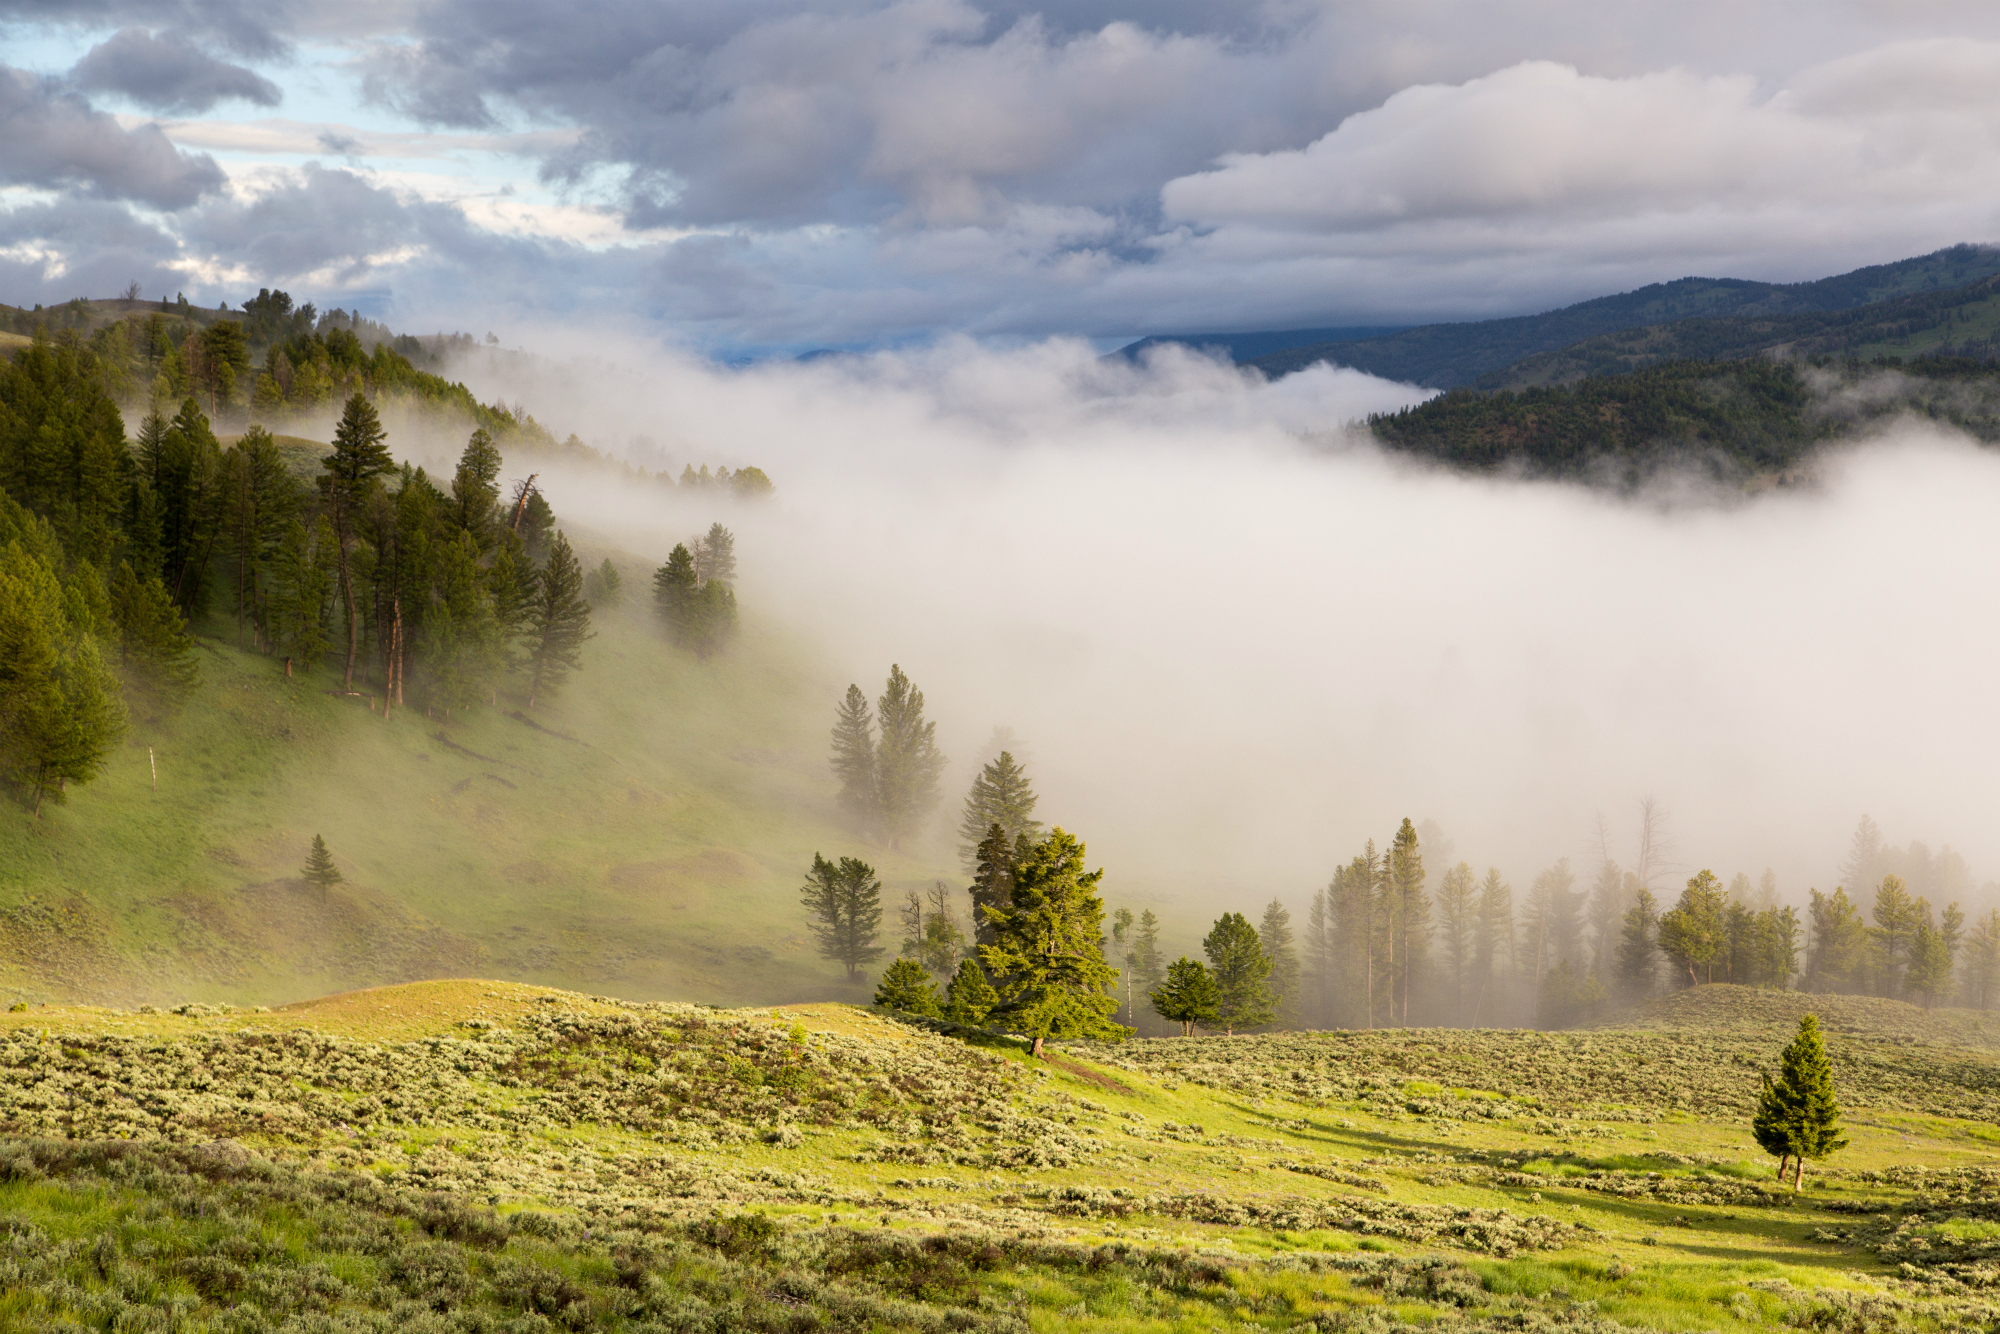 Fog rolls into a verdant valley with sunlight hitting the foreground. Evergreen trees dot the mountainside.